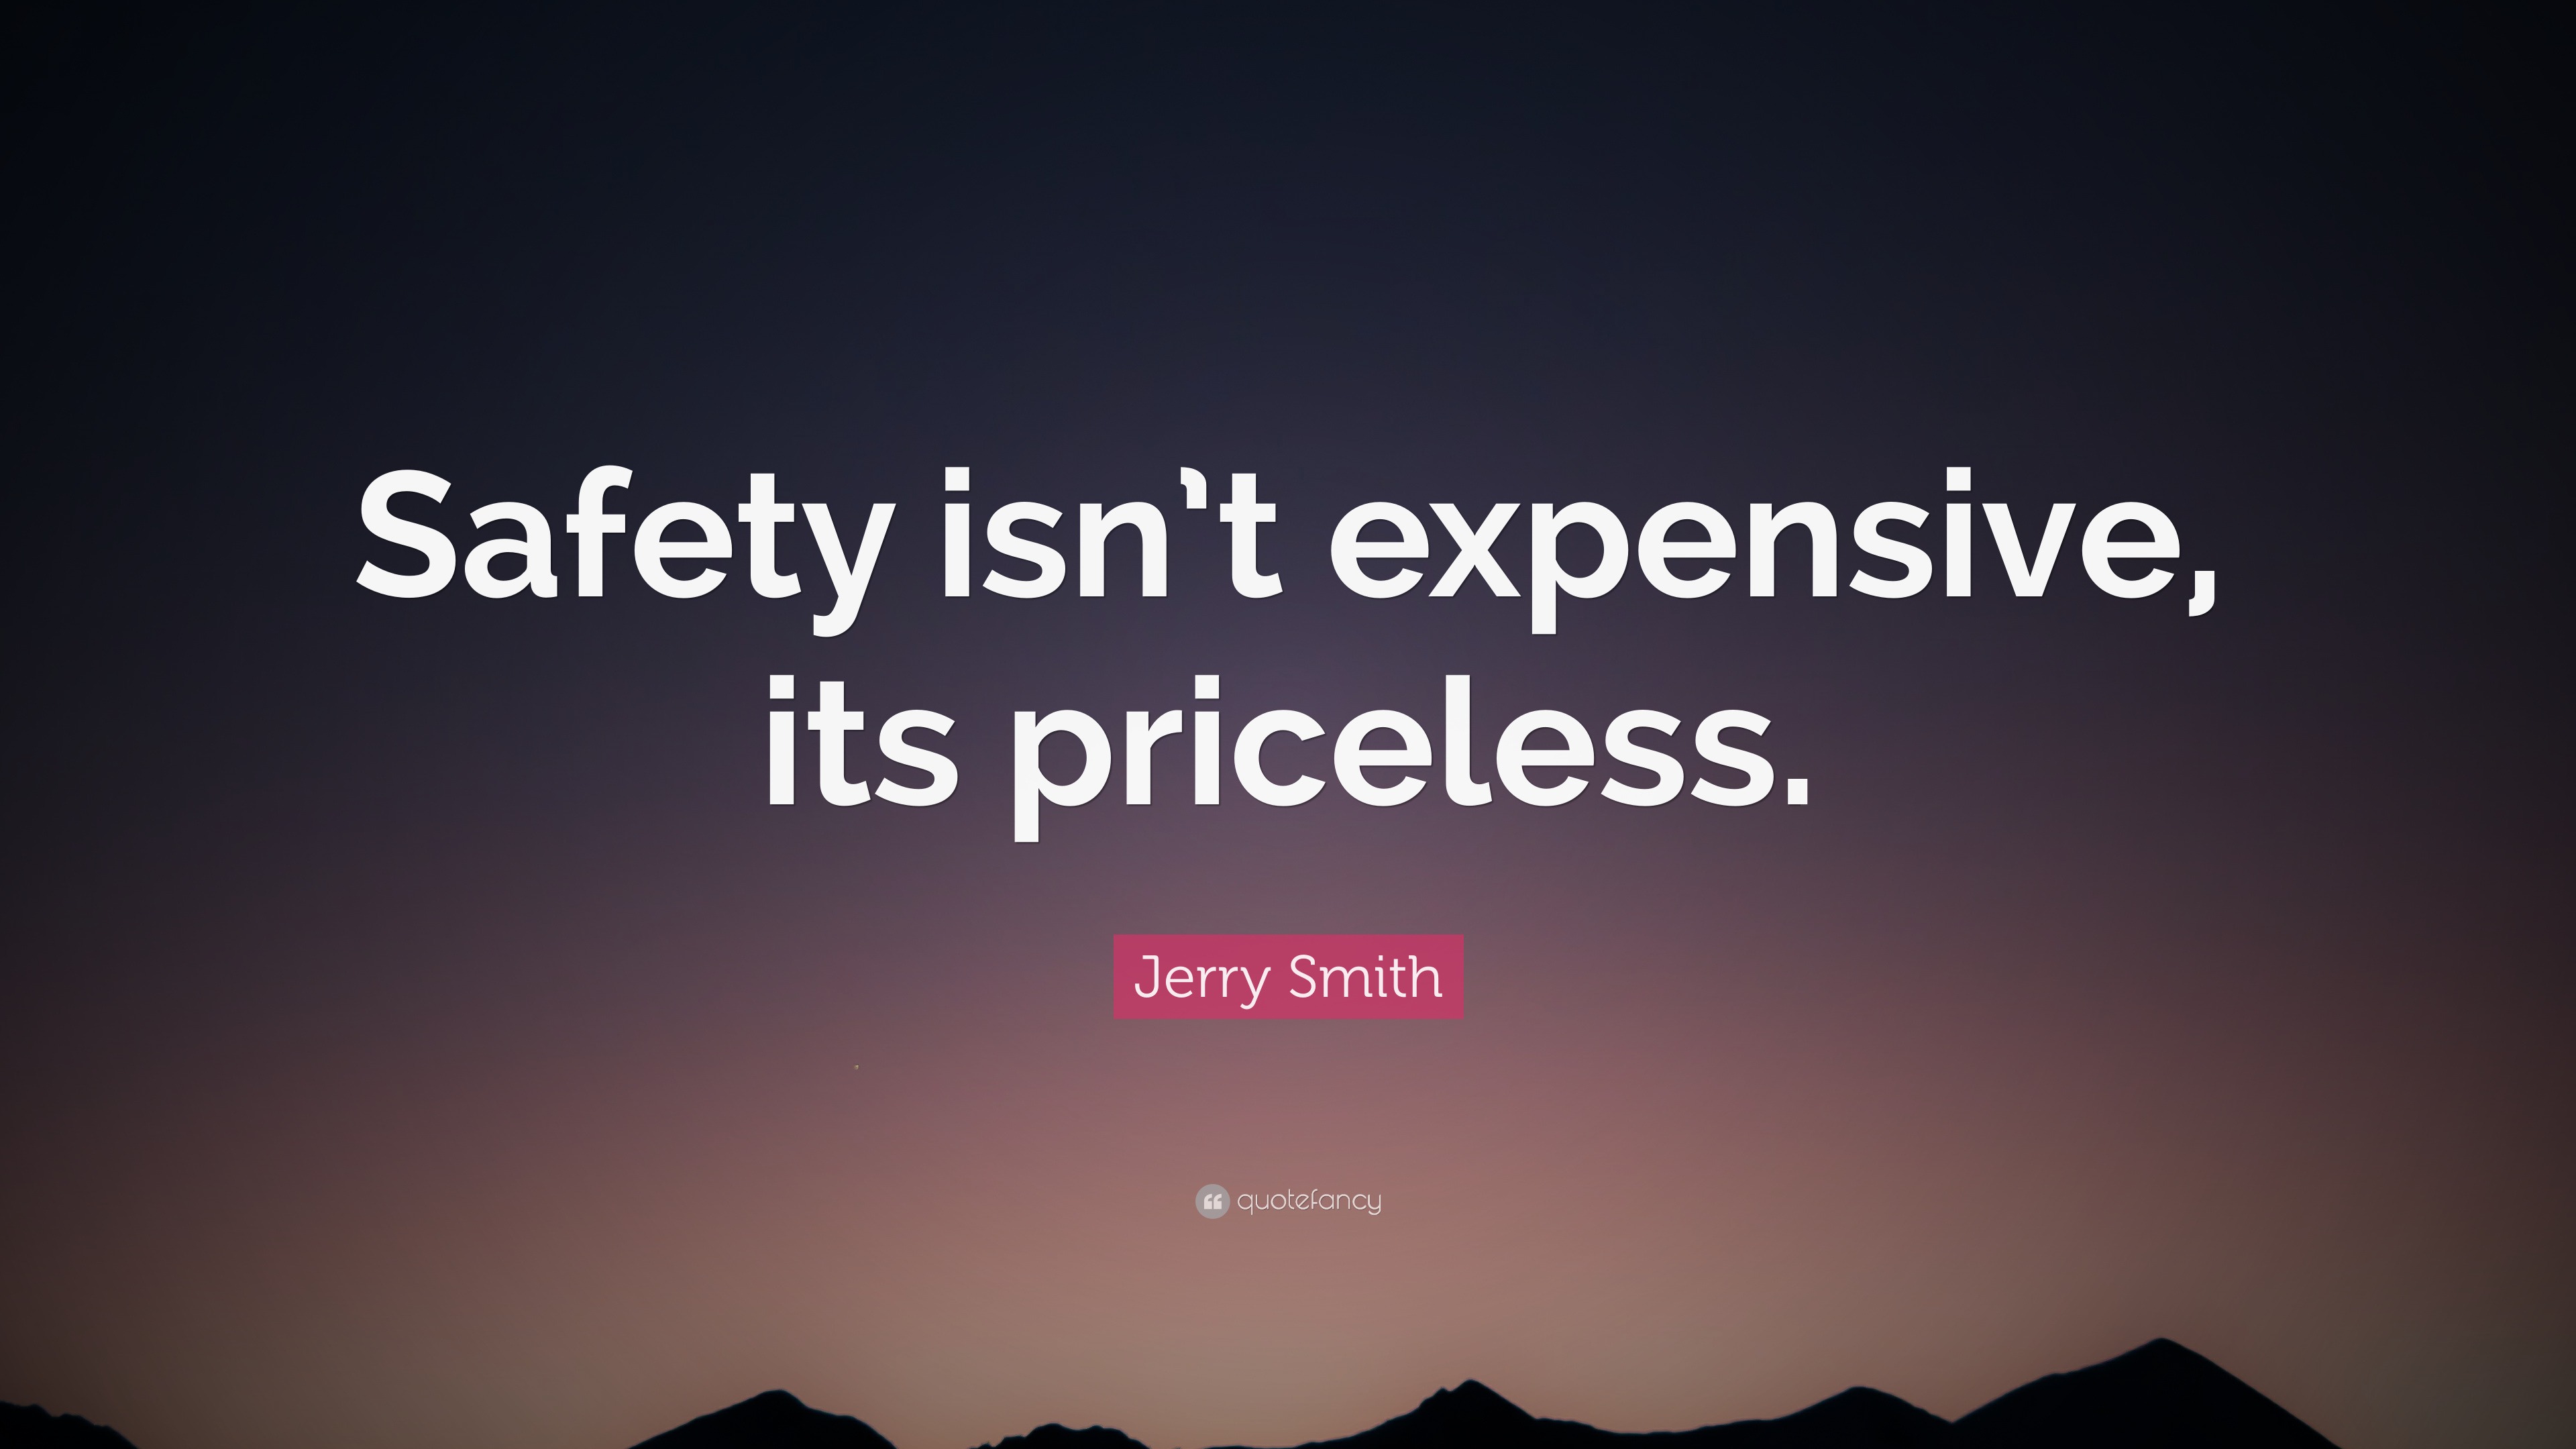 Jerry Smith Quote: “Safety isn’t expensive, its priceless.”